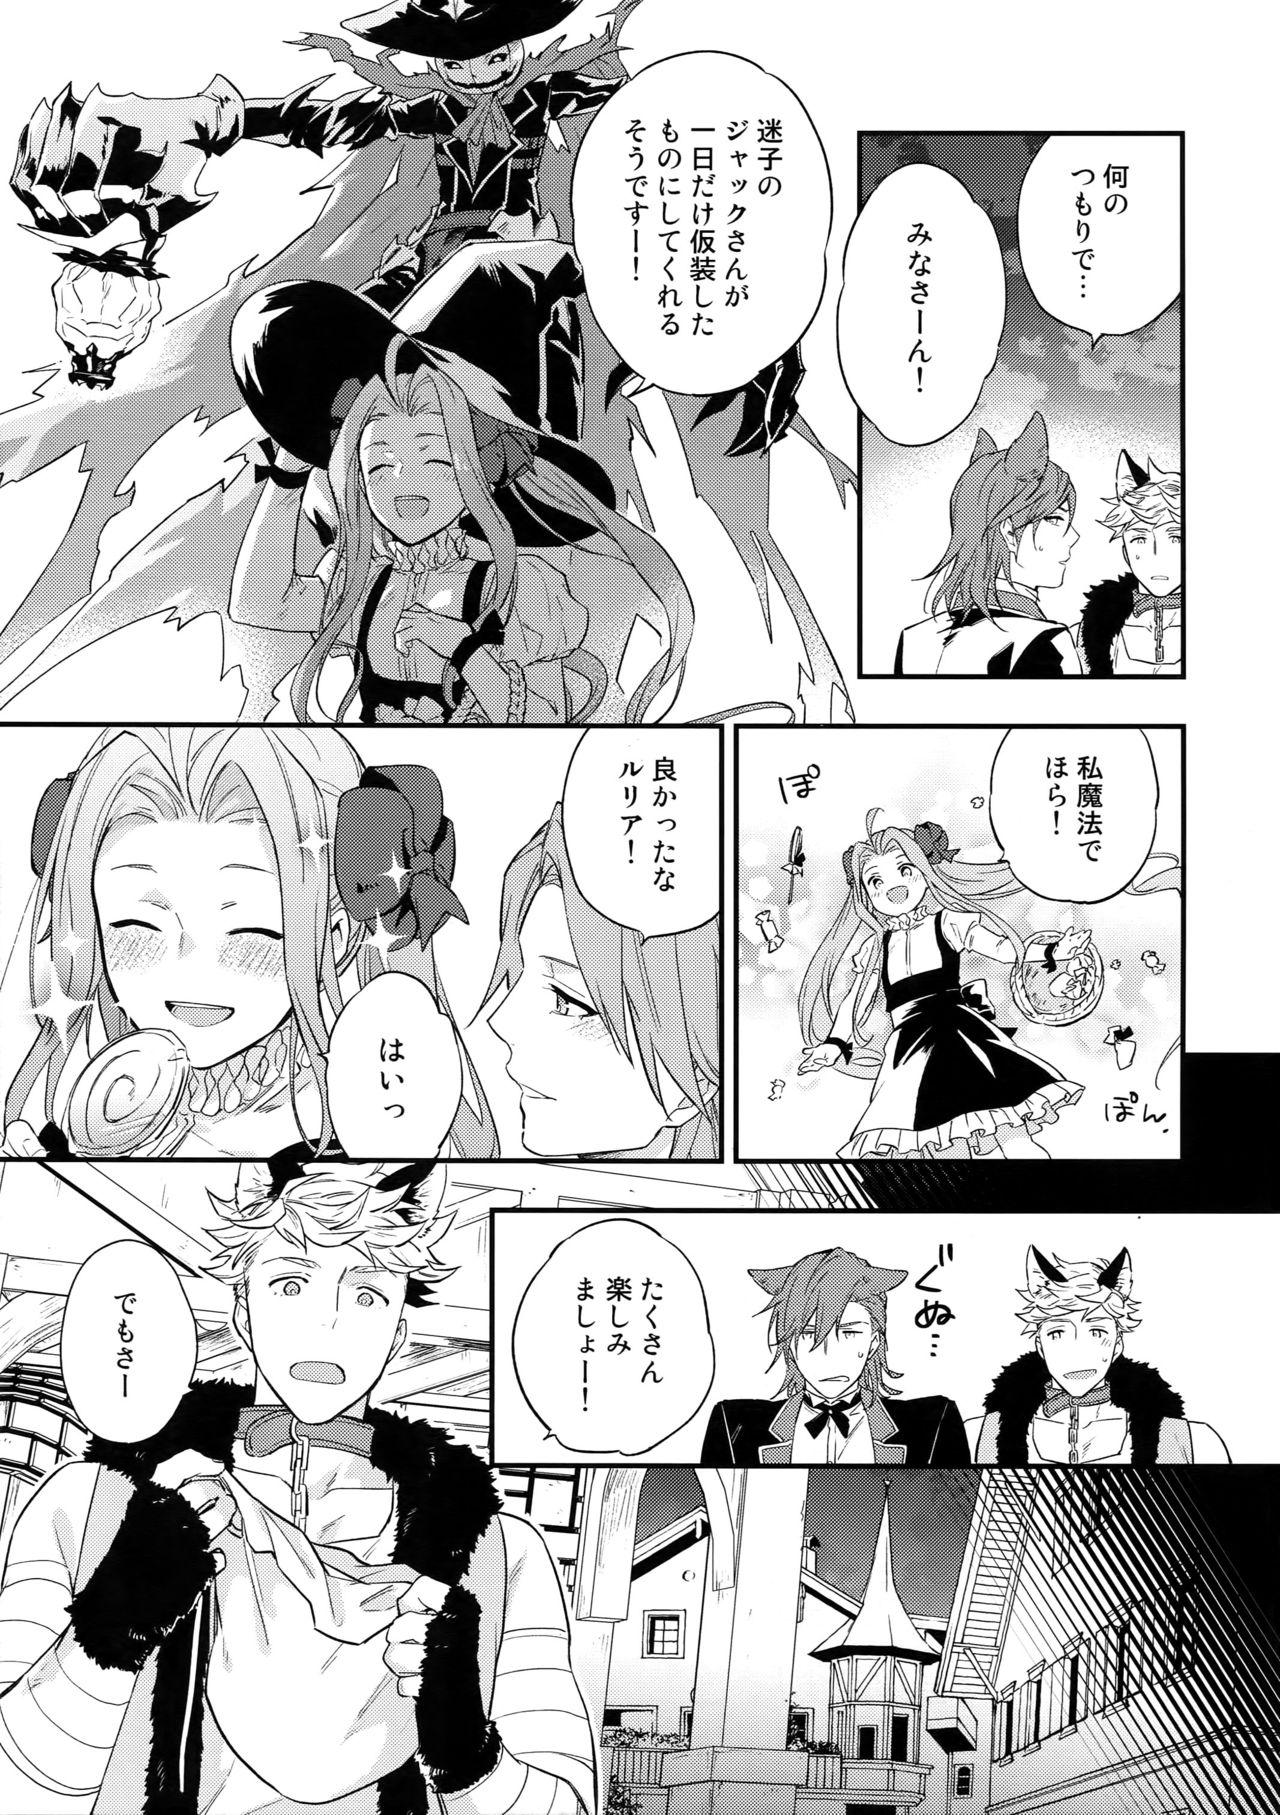 Thong Enjoy a Spooky Night! - Granblue fantasy Doublepenetration - Page 6